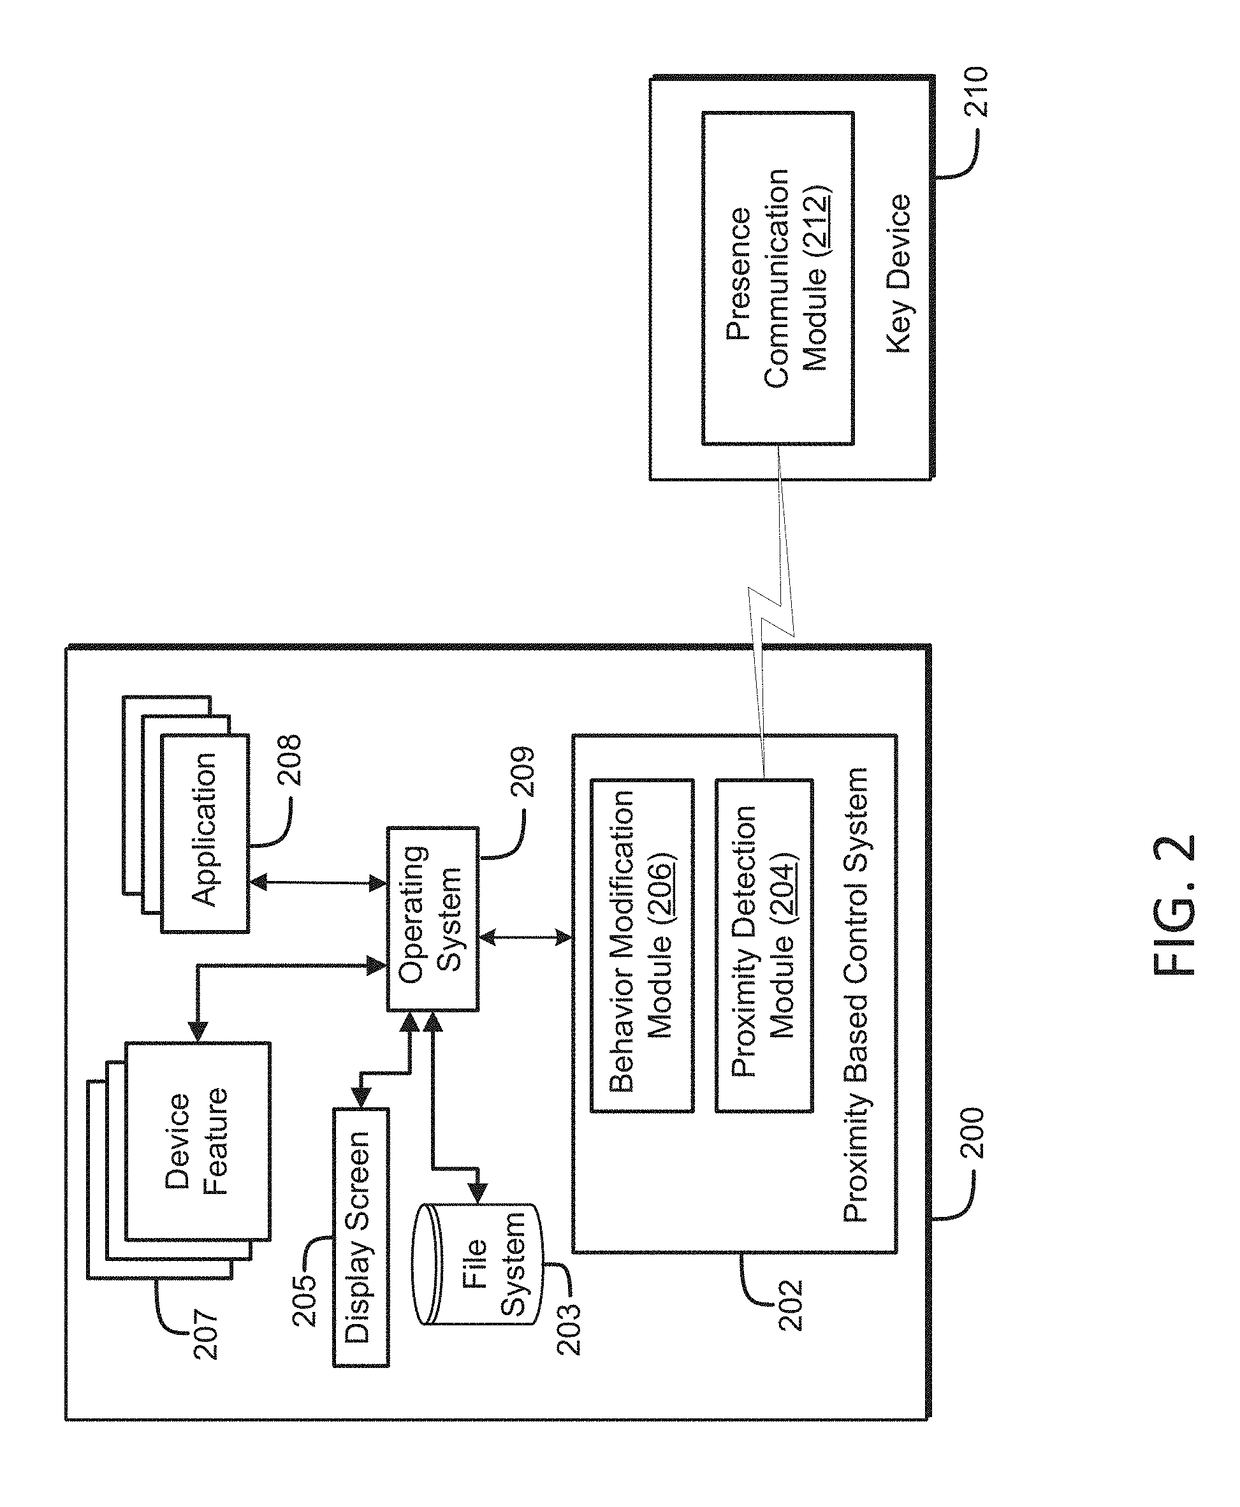 Method for changing mobile communication device functionality based upon receipt of a second code